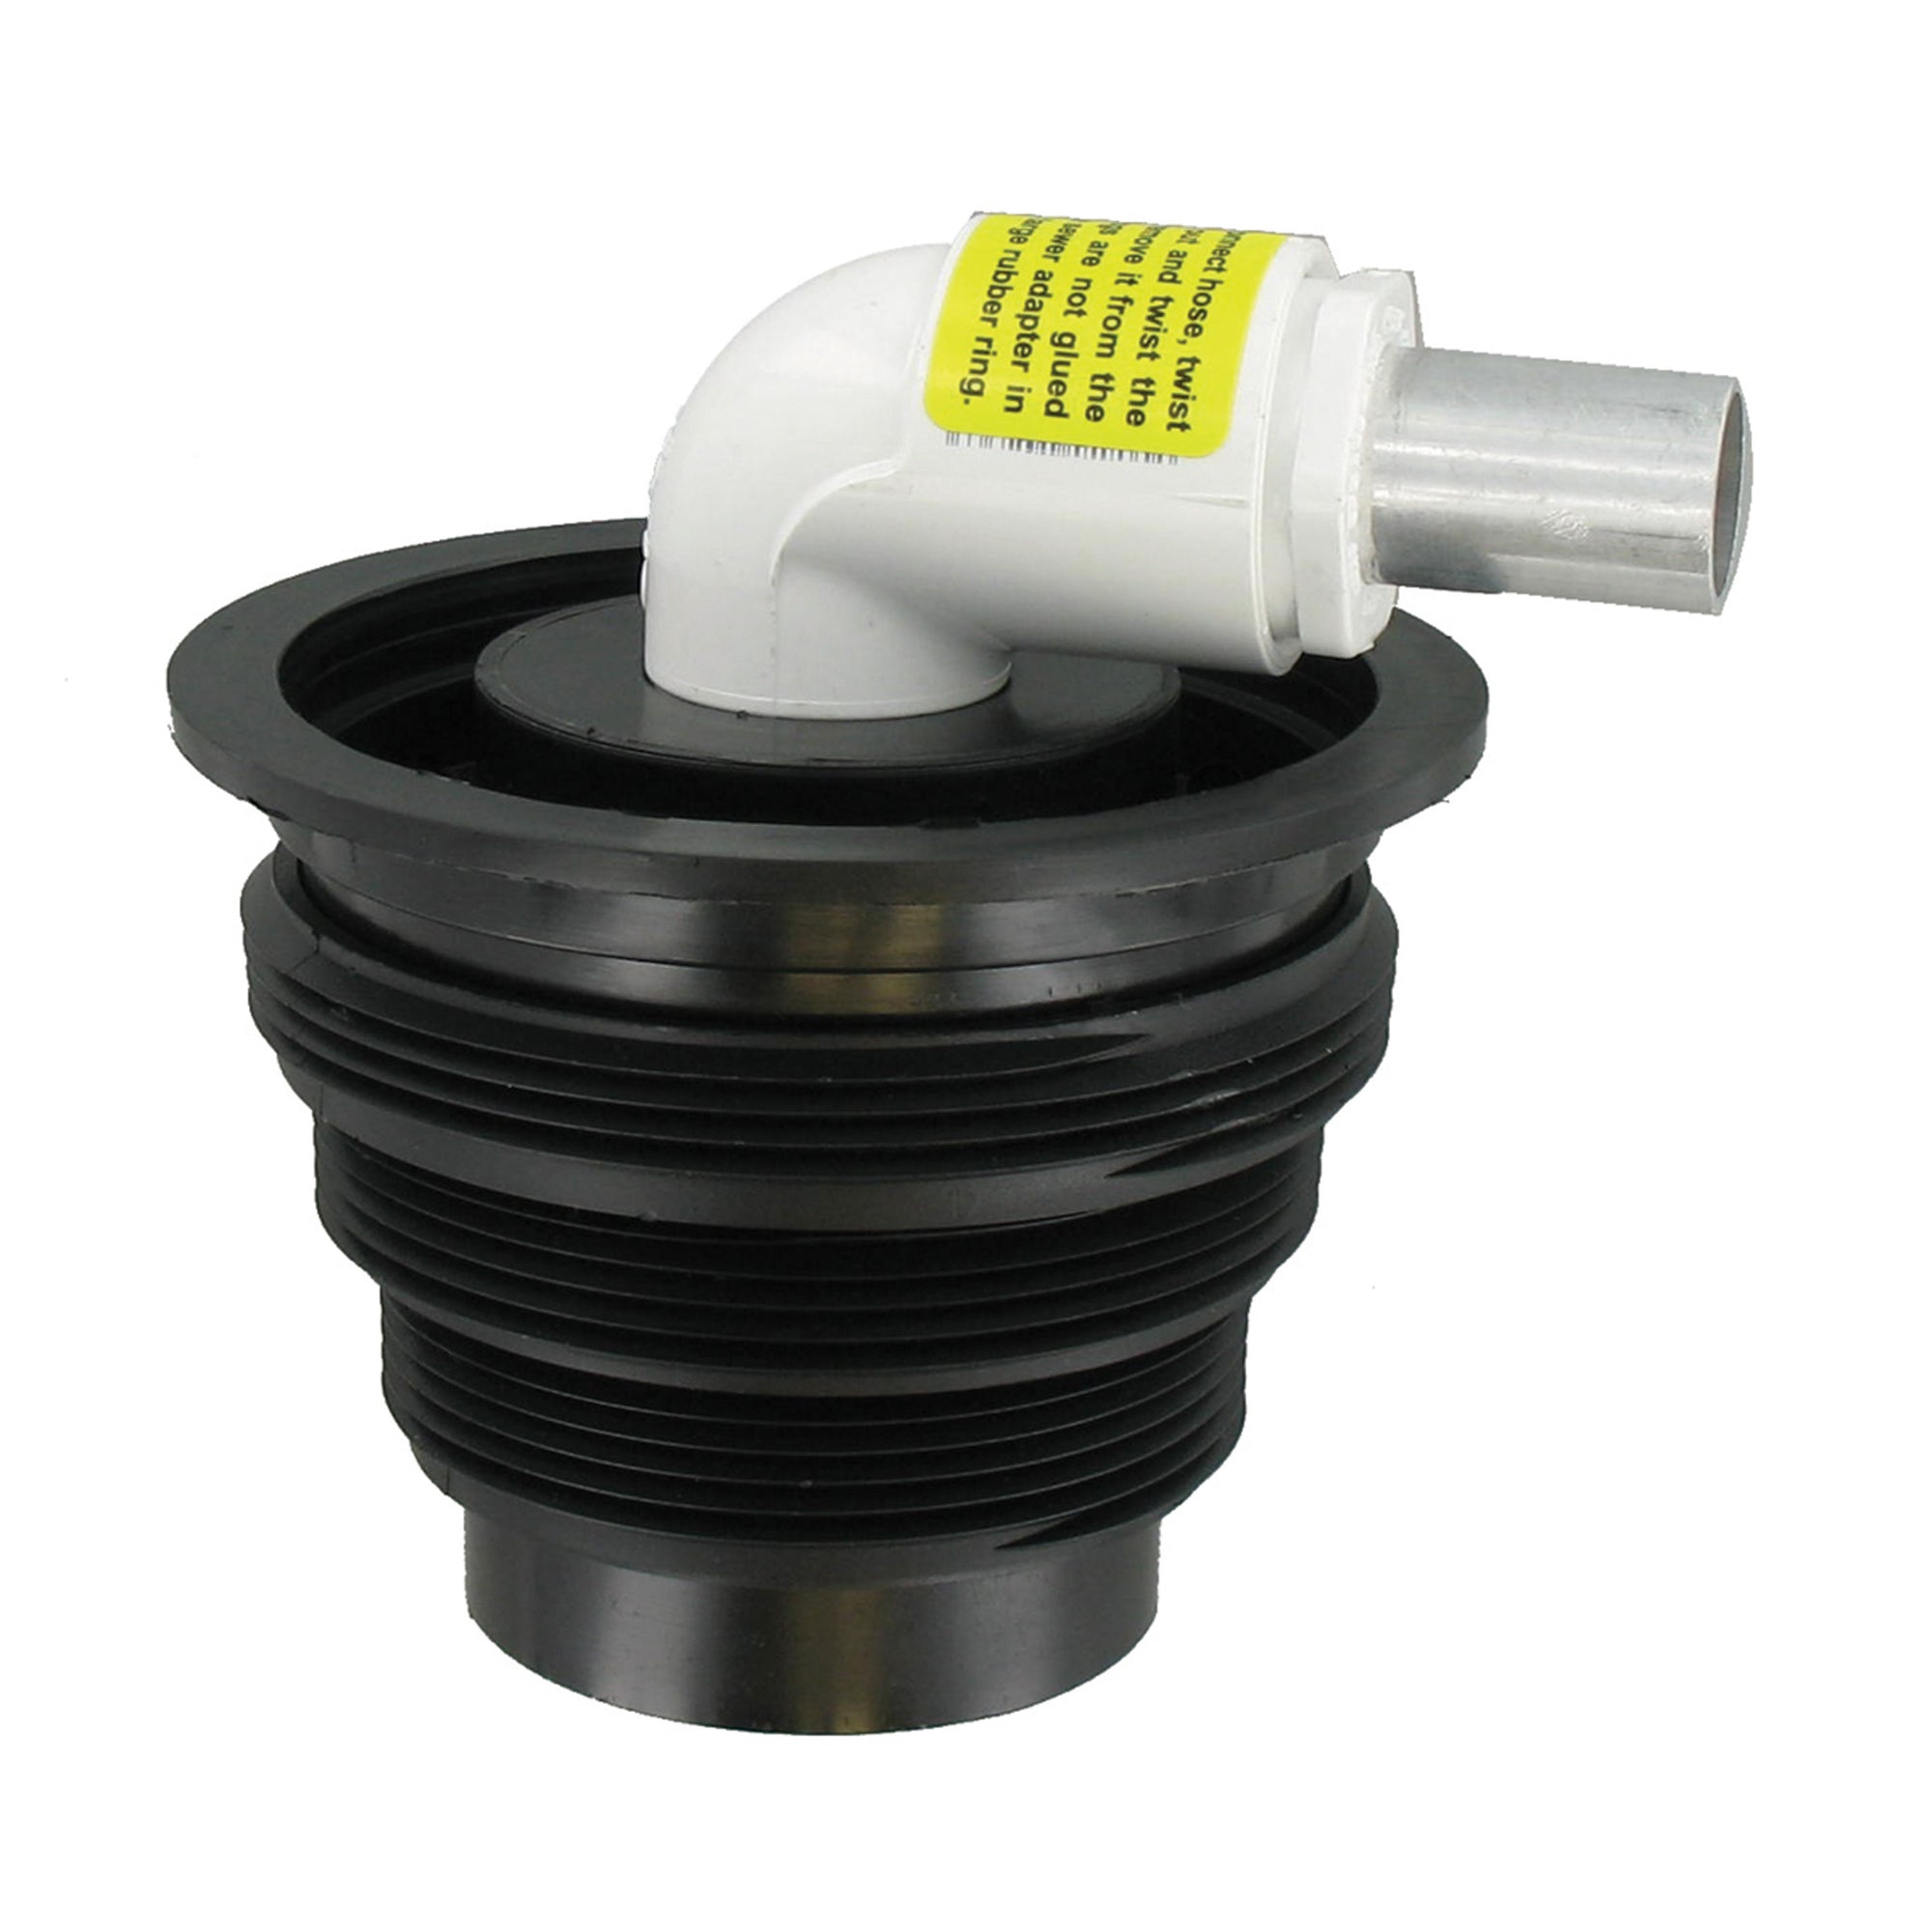 Valterra SS06 Replacement Sewer Adapter for SewerSolution